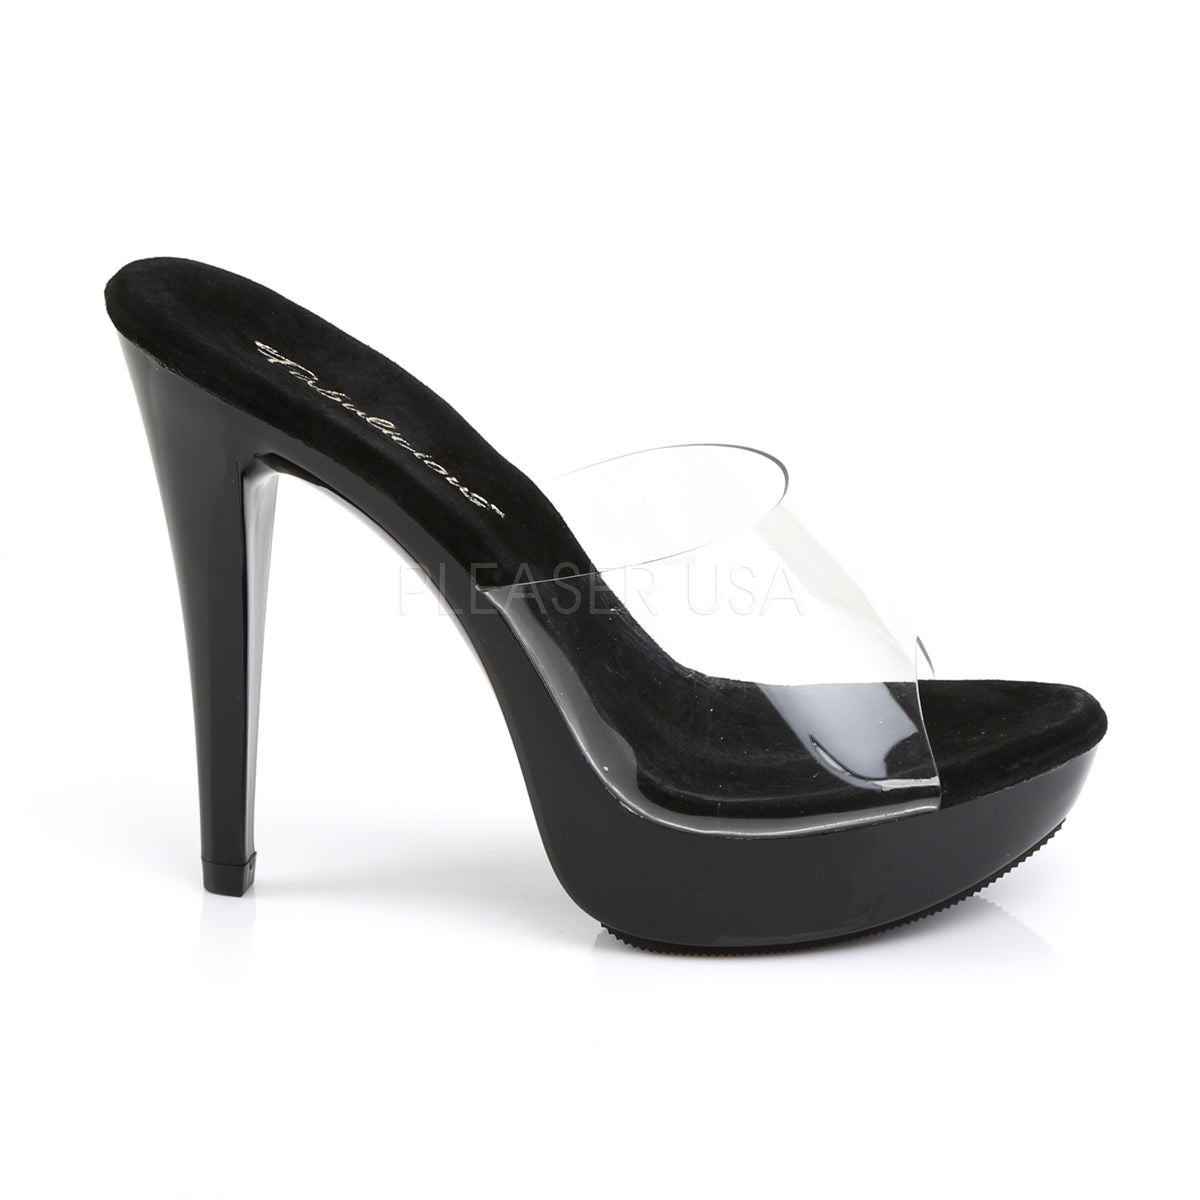 5 Inch Heel COCKTAIL-501 Clear-Black